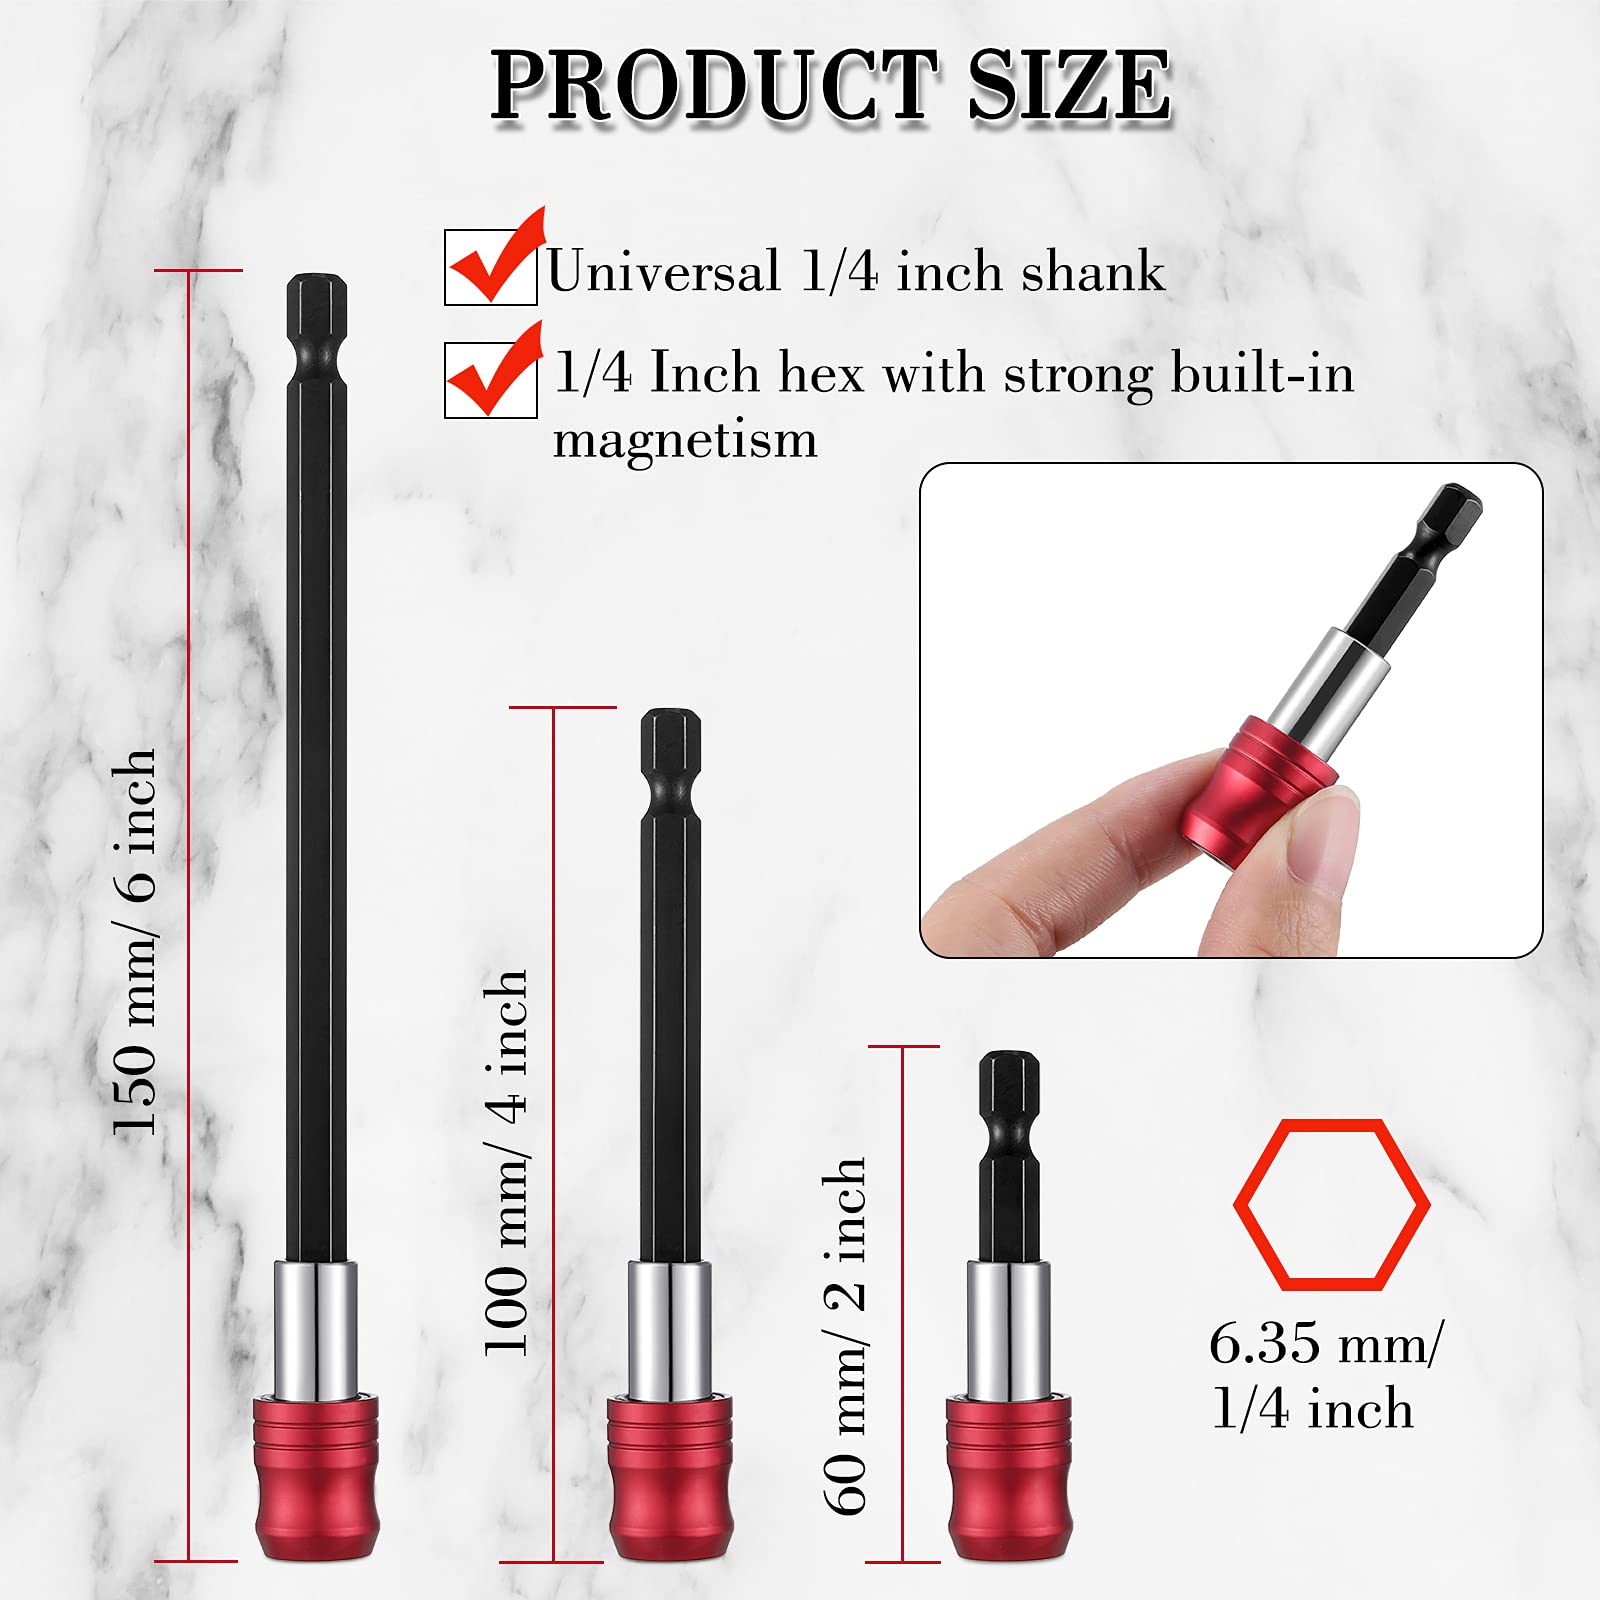 6 Pieces Drill Bit Extension Magnetic Screwdriver Bit Holder Impact Driver Bit Set Bar Socket Chuck Adapter 1/4 Inch Hex Shank Power Magnetic Bit Holder for Screws Nuts Drill